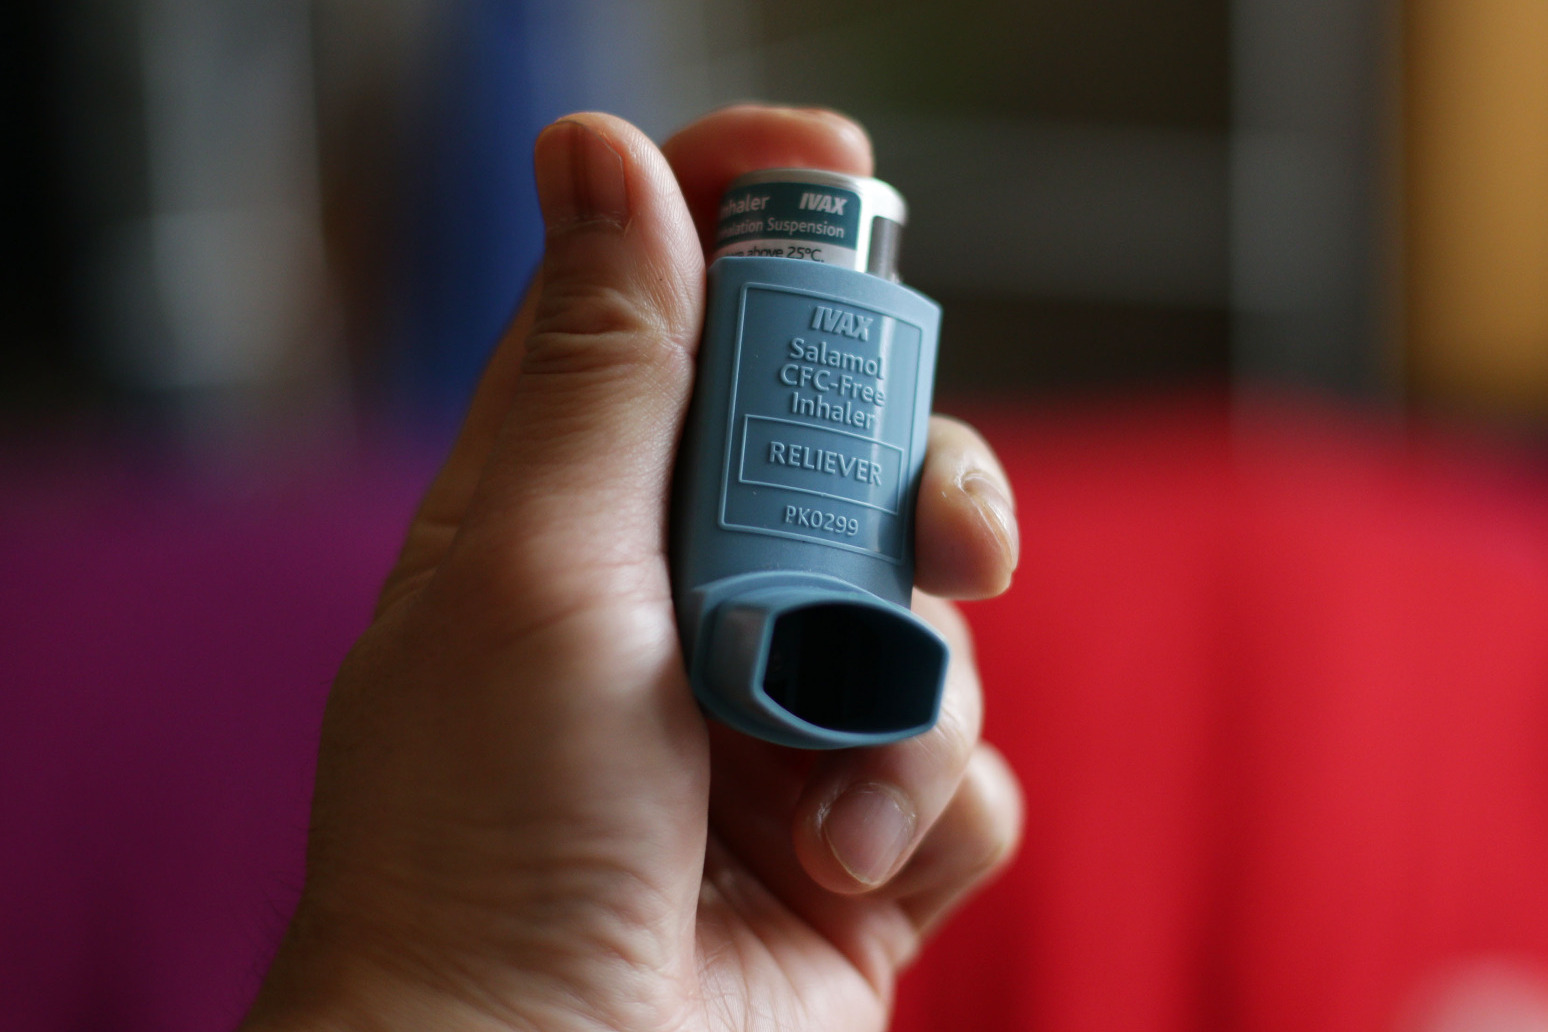 Women ‘twice as likely to die from asthma’ 